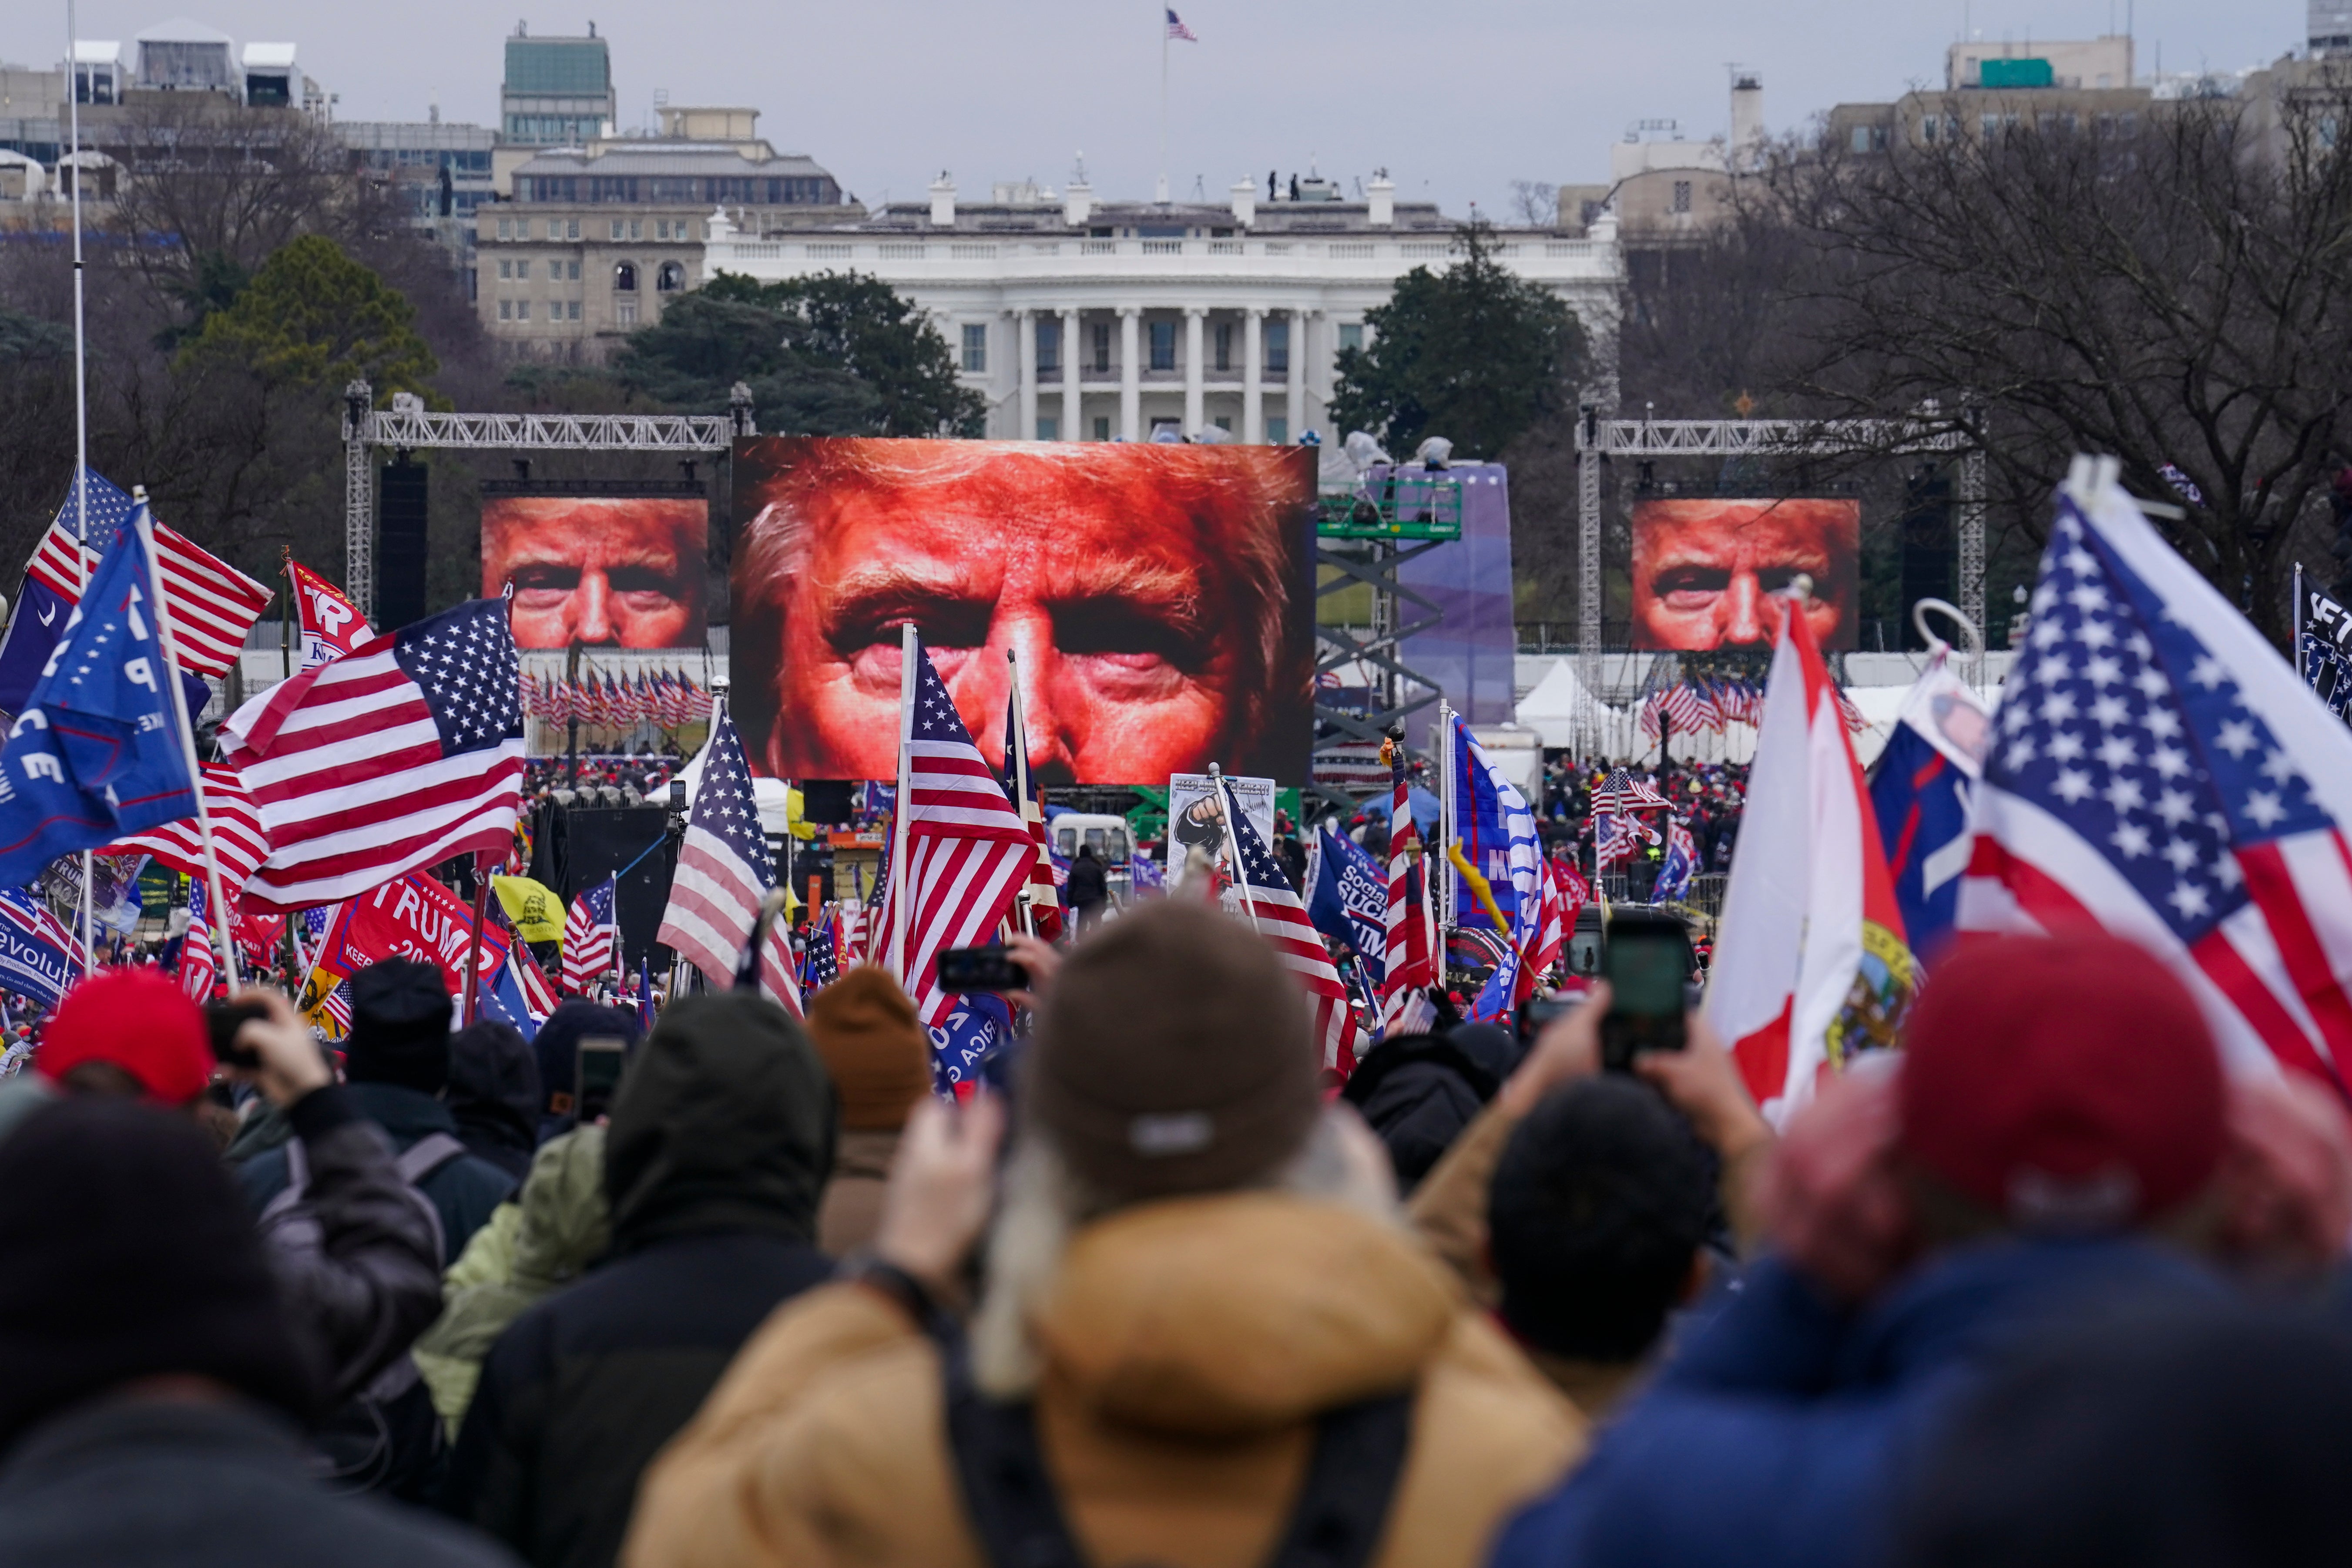 Donald Trump’s supporters listen to him speak in Washington DC on 6 January, 2021.